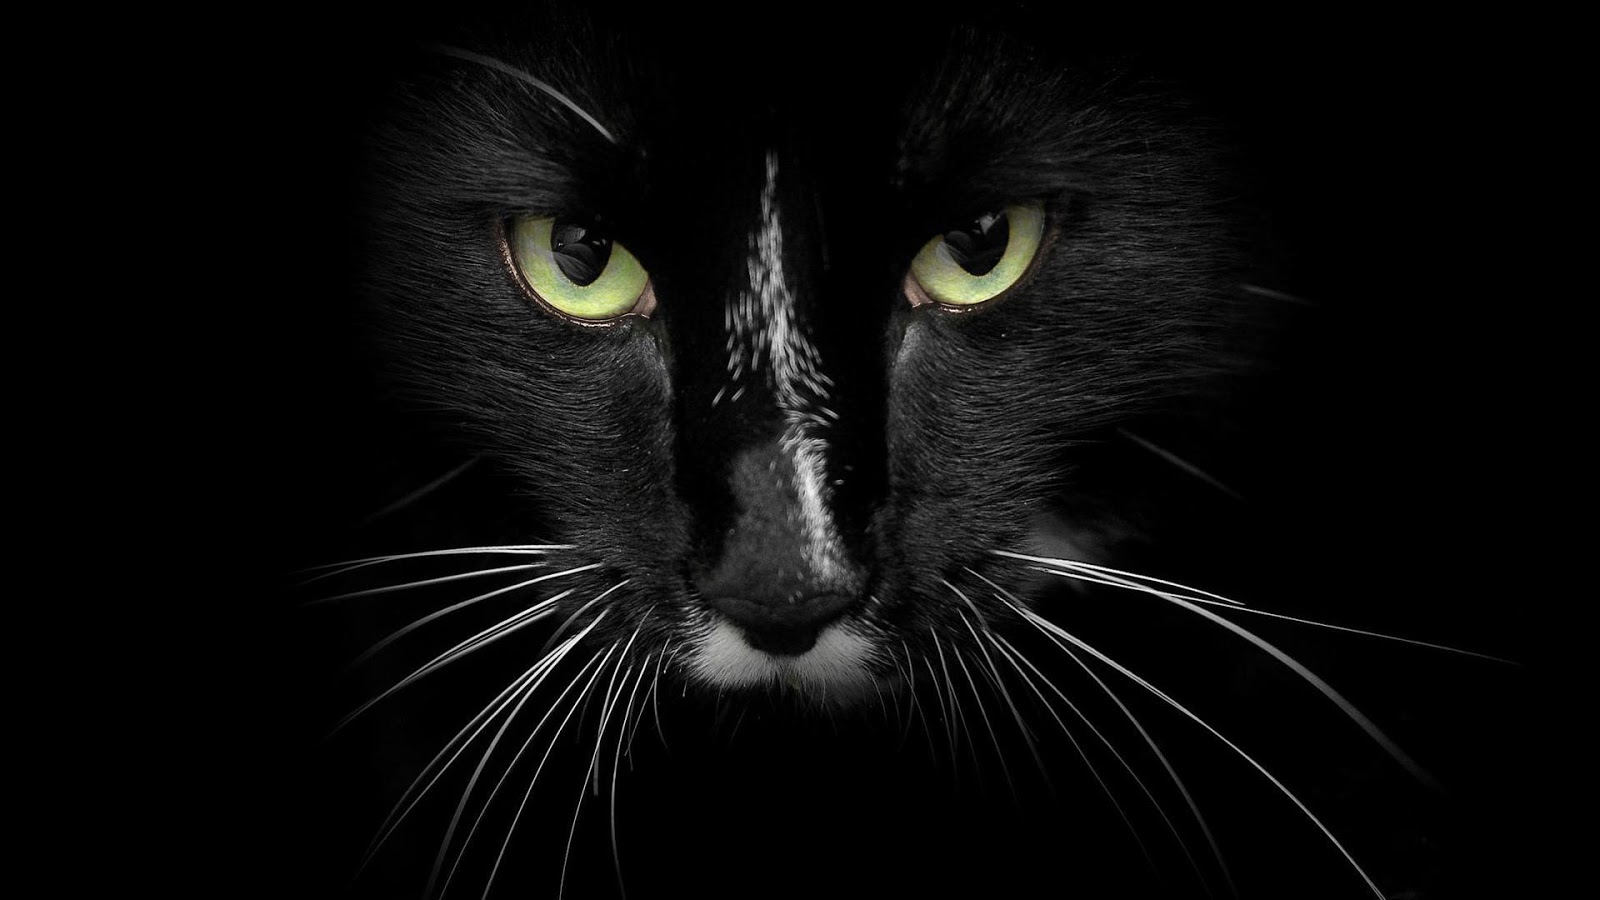 The Black Cat HD Wallpaper | All the Latest and Exclusive HD Wallpapers